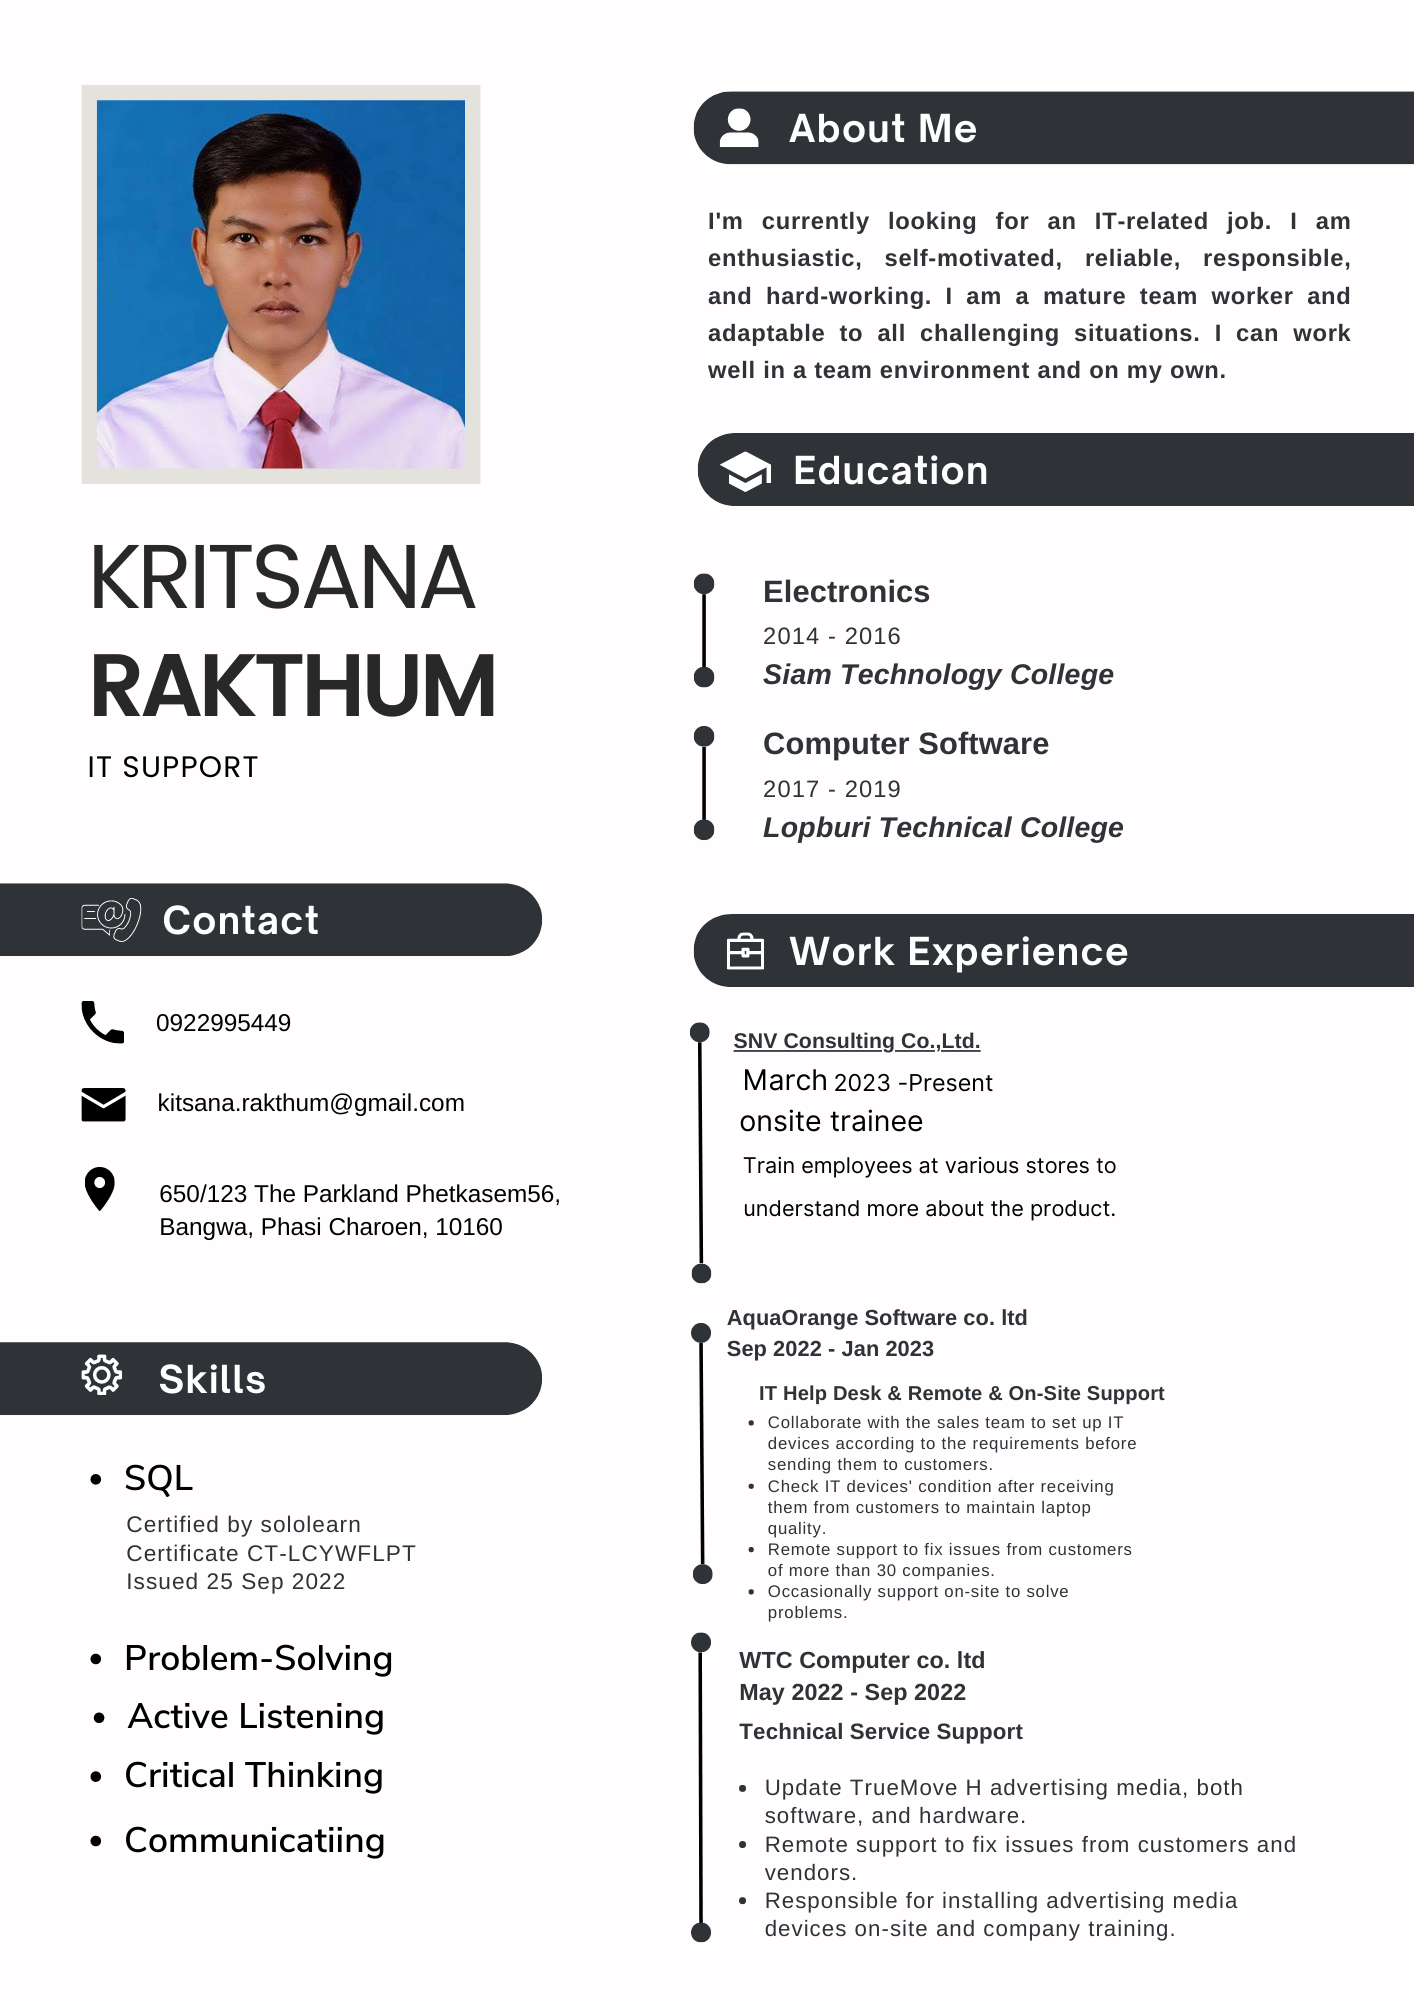 t

KRITSANA
RAKTHUM

IT SUPPORT

0922995449

kitsana.rakthum@gmail.com

© Ur

Bangwa, Phasi Charoen, 10160

LE

pan

. SQL

Certified by sololearn
Certificate CT-LCYWFLPT
Issued 25 Sep 2022

* Problem-Solving
* Active Listening

e Critical Thinking

¢ Communicatiing

650/123 The Parkland Phetkasem56,

2 About Me

I'm currently looking for an IT-related job. | am
enthusiastic, self-motivated, reliable, responsible,
and hard-working. | am a mature team worker and
adaptable to all challenging situations. | can work
well in a team environment and on my own.

® Education

Electronics
2014 - 2016
Siam Technology College

Computer Software
2017 - 2019
Lopburi Technical College

[5 Work Experience ~~ LY ECL EU TG

SNV Consulting Co.,Ltd.

March 2023 -Present

onsite trainee

Train employees at various stores to

understand more about the product.

AquaOrange Software co. Itd

Sep 2022 - Jan 2023
IT JG Desk &amp; Remote &amp; On-Site Support
g them to cu

  
 
  

 

 

m 10 set up IT

irements before
IT devices’ condition after receiving
rom customers to maintain laptop

 

quality
+ Remote §
ot mor
asionally support on-sit
problems

4ppOrt to tix
han 30 companies.

      

WTC Computer co. ltd
May 2022 - Sep 2022

Technical Service Support

« Update TrueMove H advertising media. both
software, and hardware

« Remote support to fix issues from customers and
vendors

* Responsible for installing advertising media
devices on-site and company training